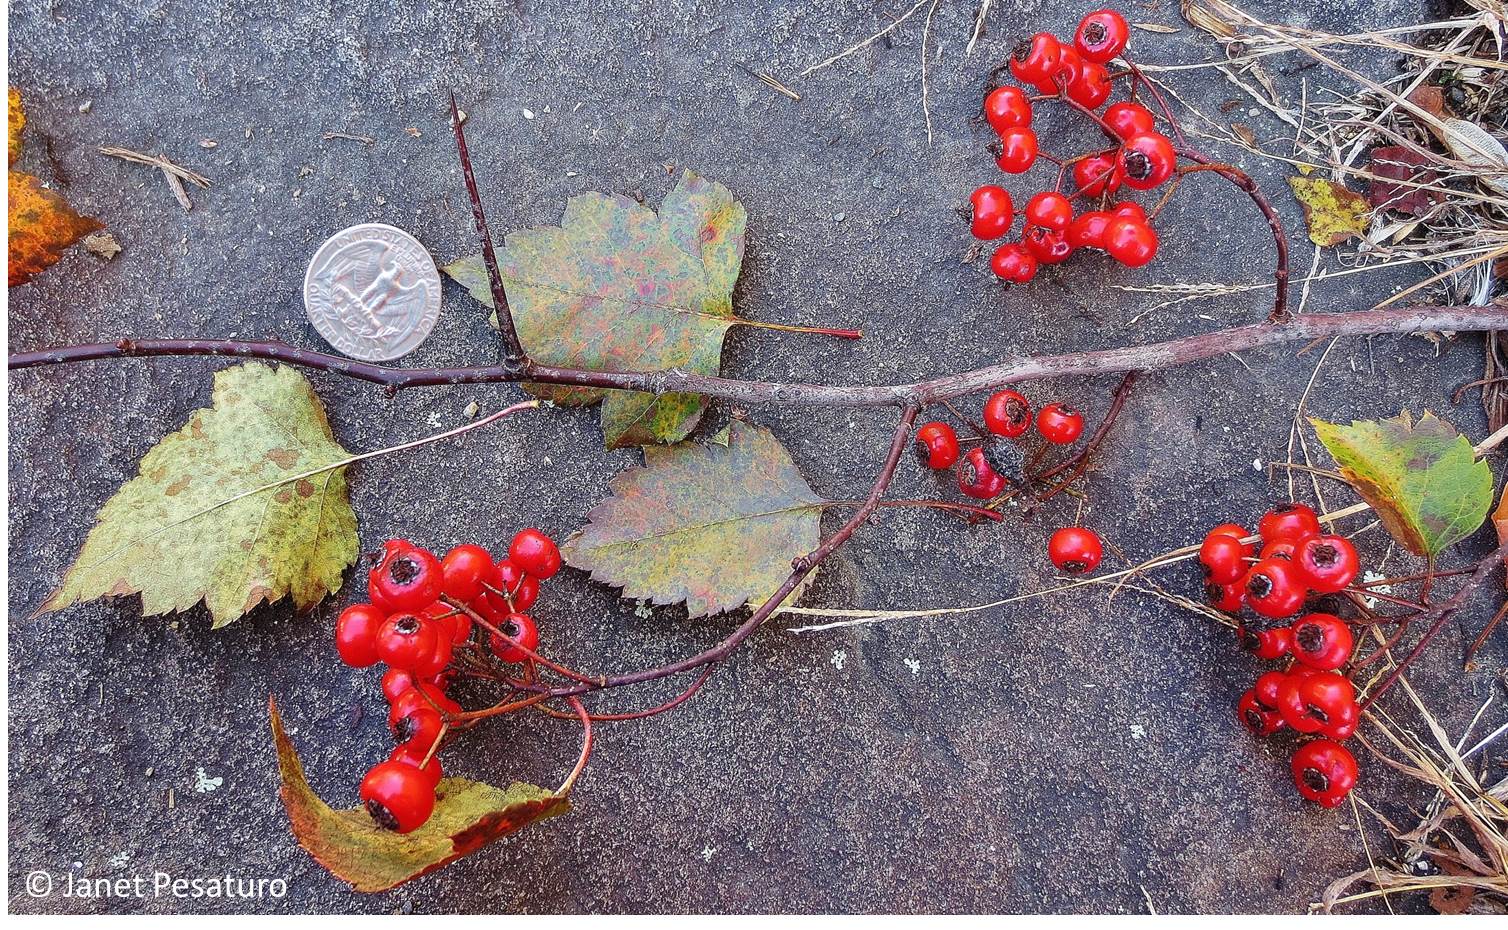 How to Identify Red Berry Trees in Ohio